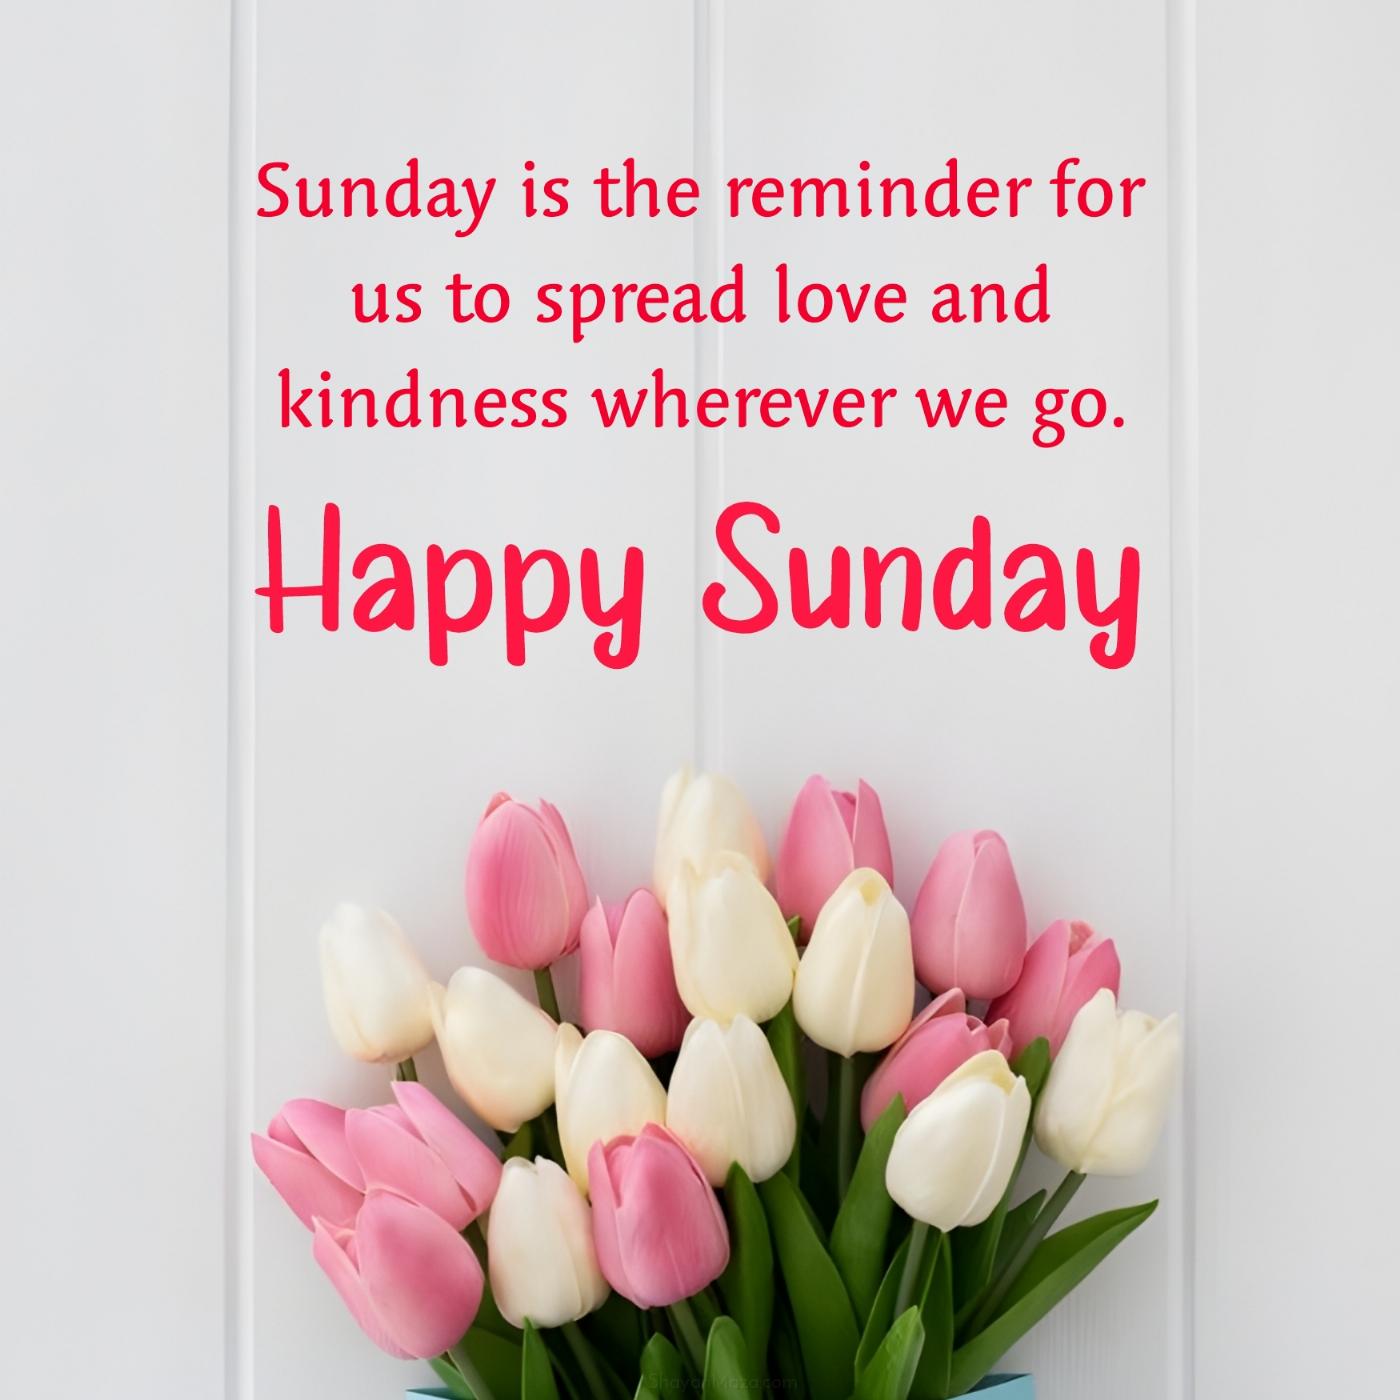 Sunday is the reminder for us to spread love and kindness